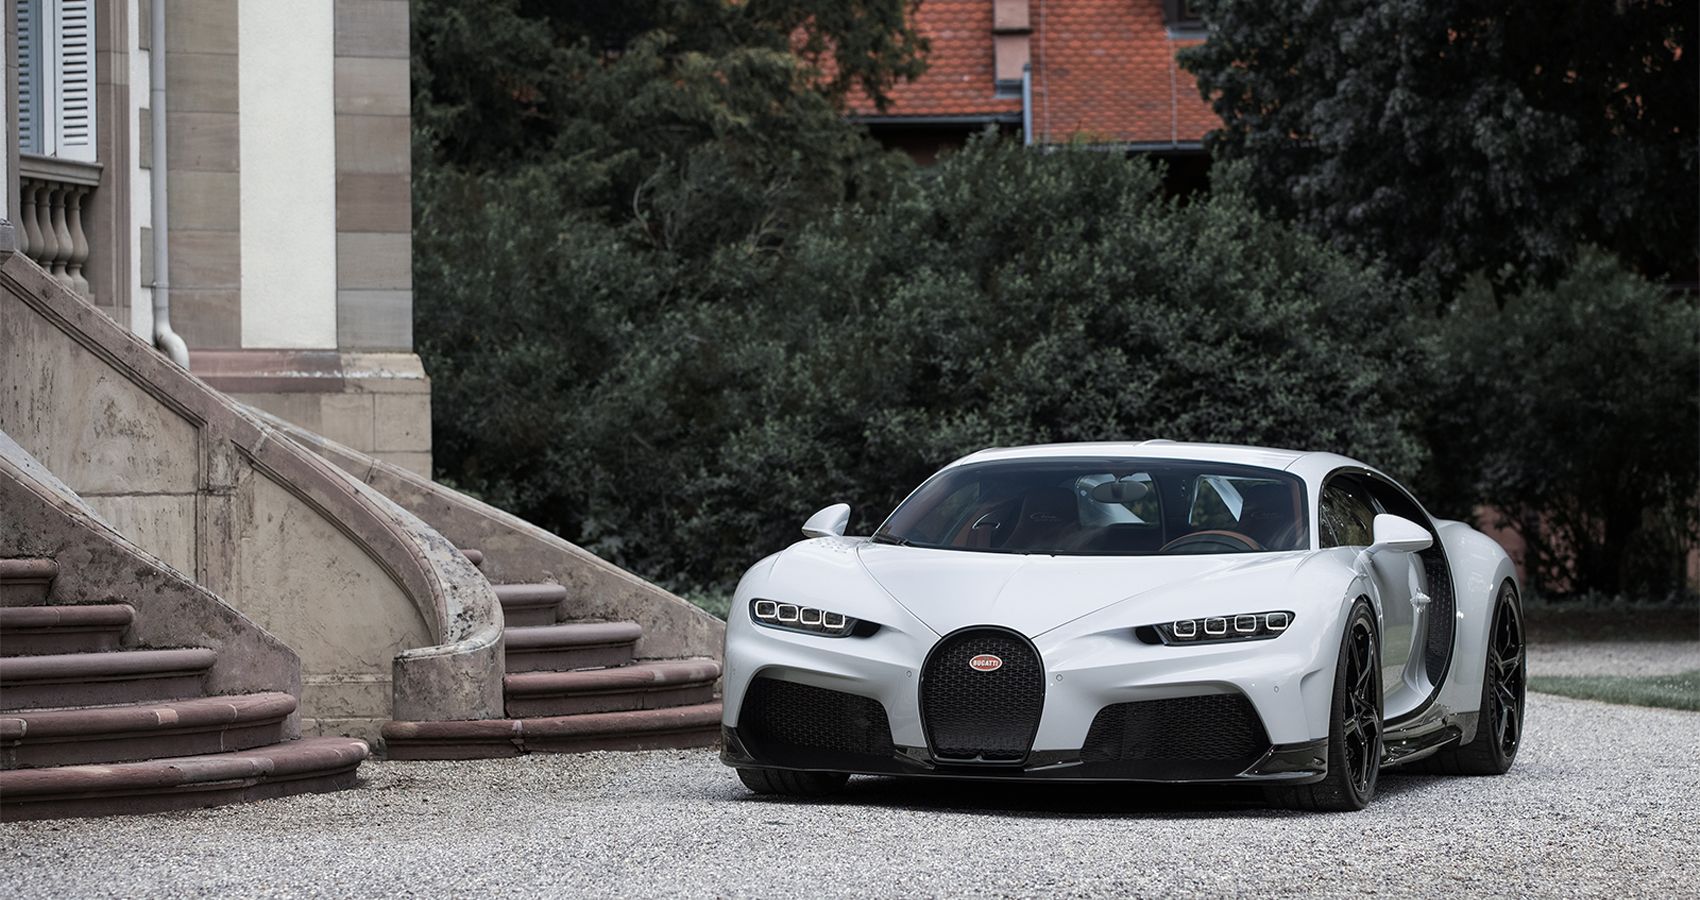 The front of the Chiron Super Sport outside a house